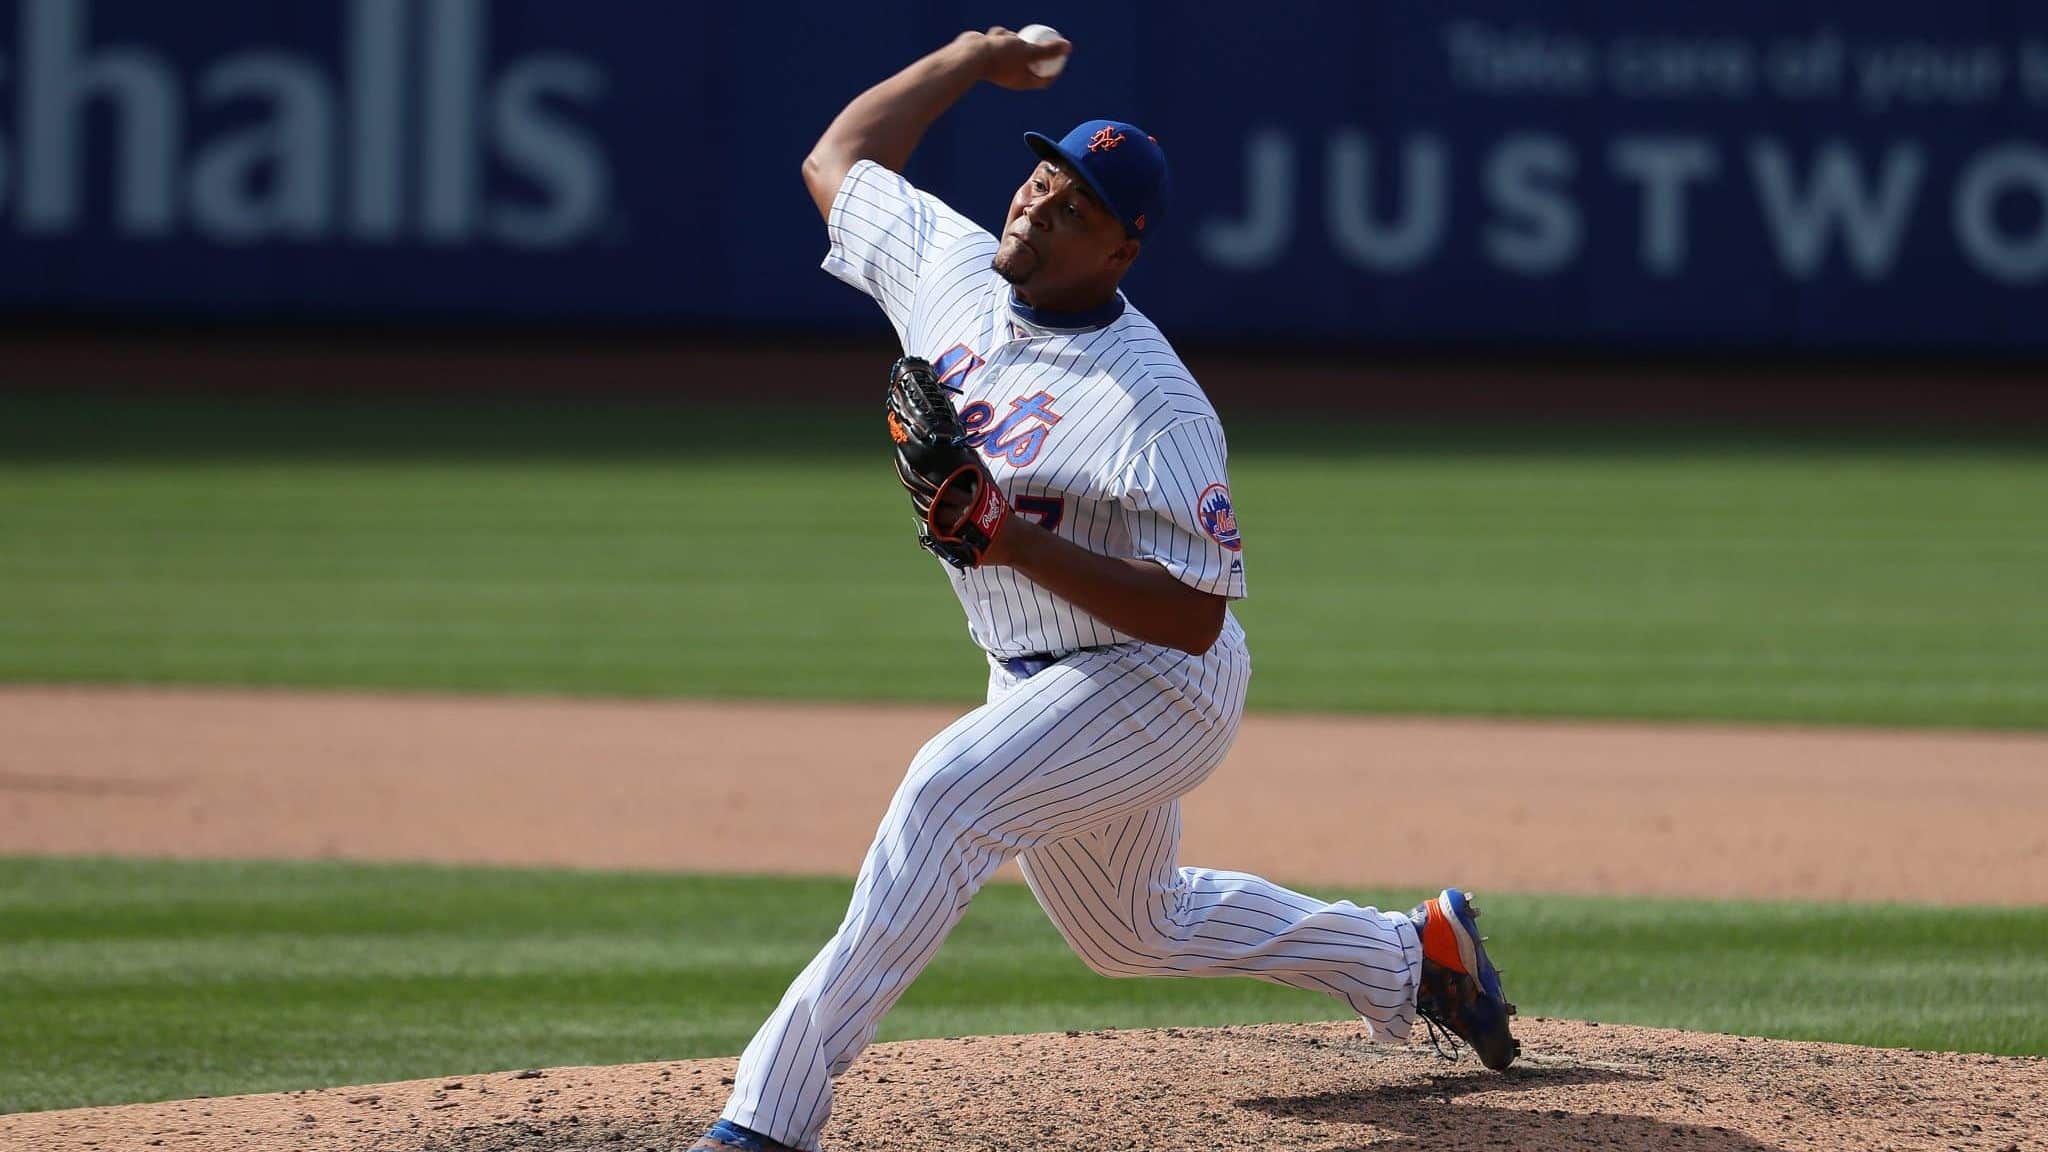 NEW YORK, NEW YORK - AUGUST 11: Jeurys Familia #27 of the New York Mets in action against the Washington Nationals during their game at Citi Field on August 11, 2019 in New York City.